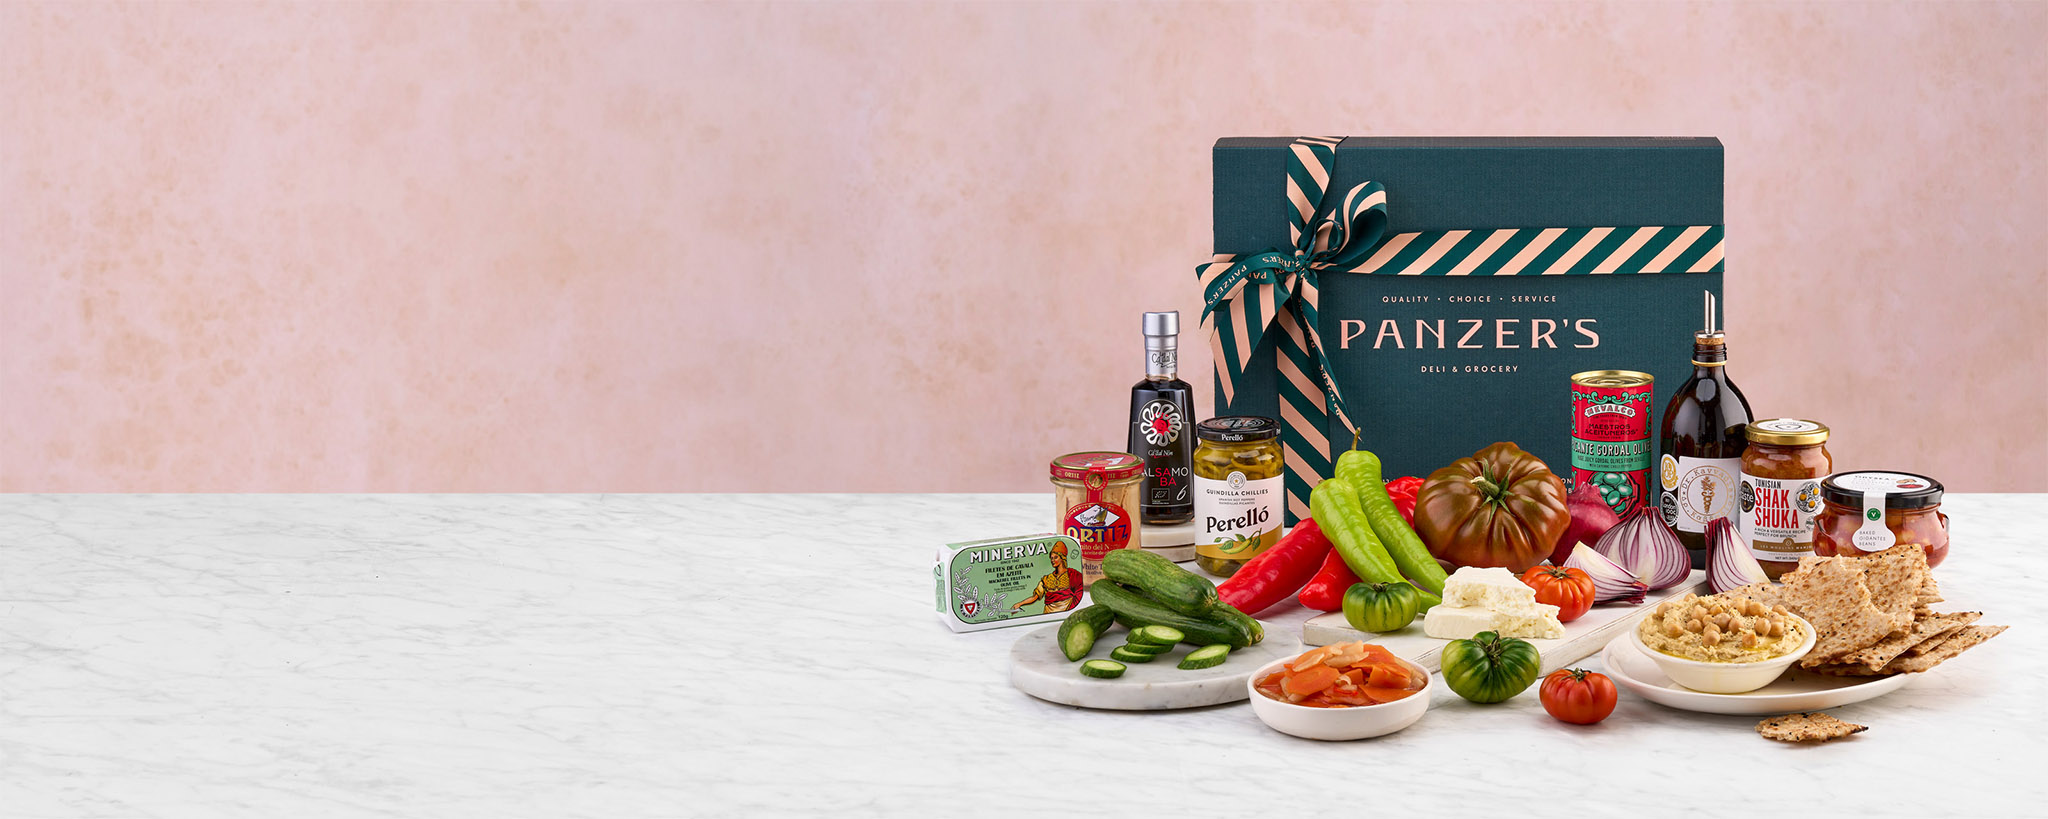 Panzer's Mediterranean Brunch hamper full of fresh produce and flavours of Southern Europe